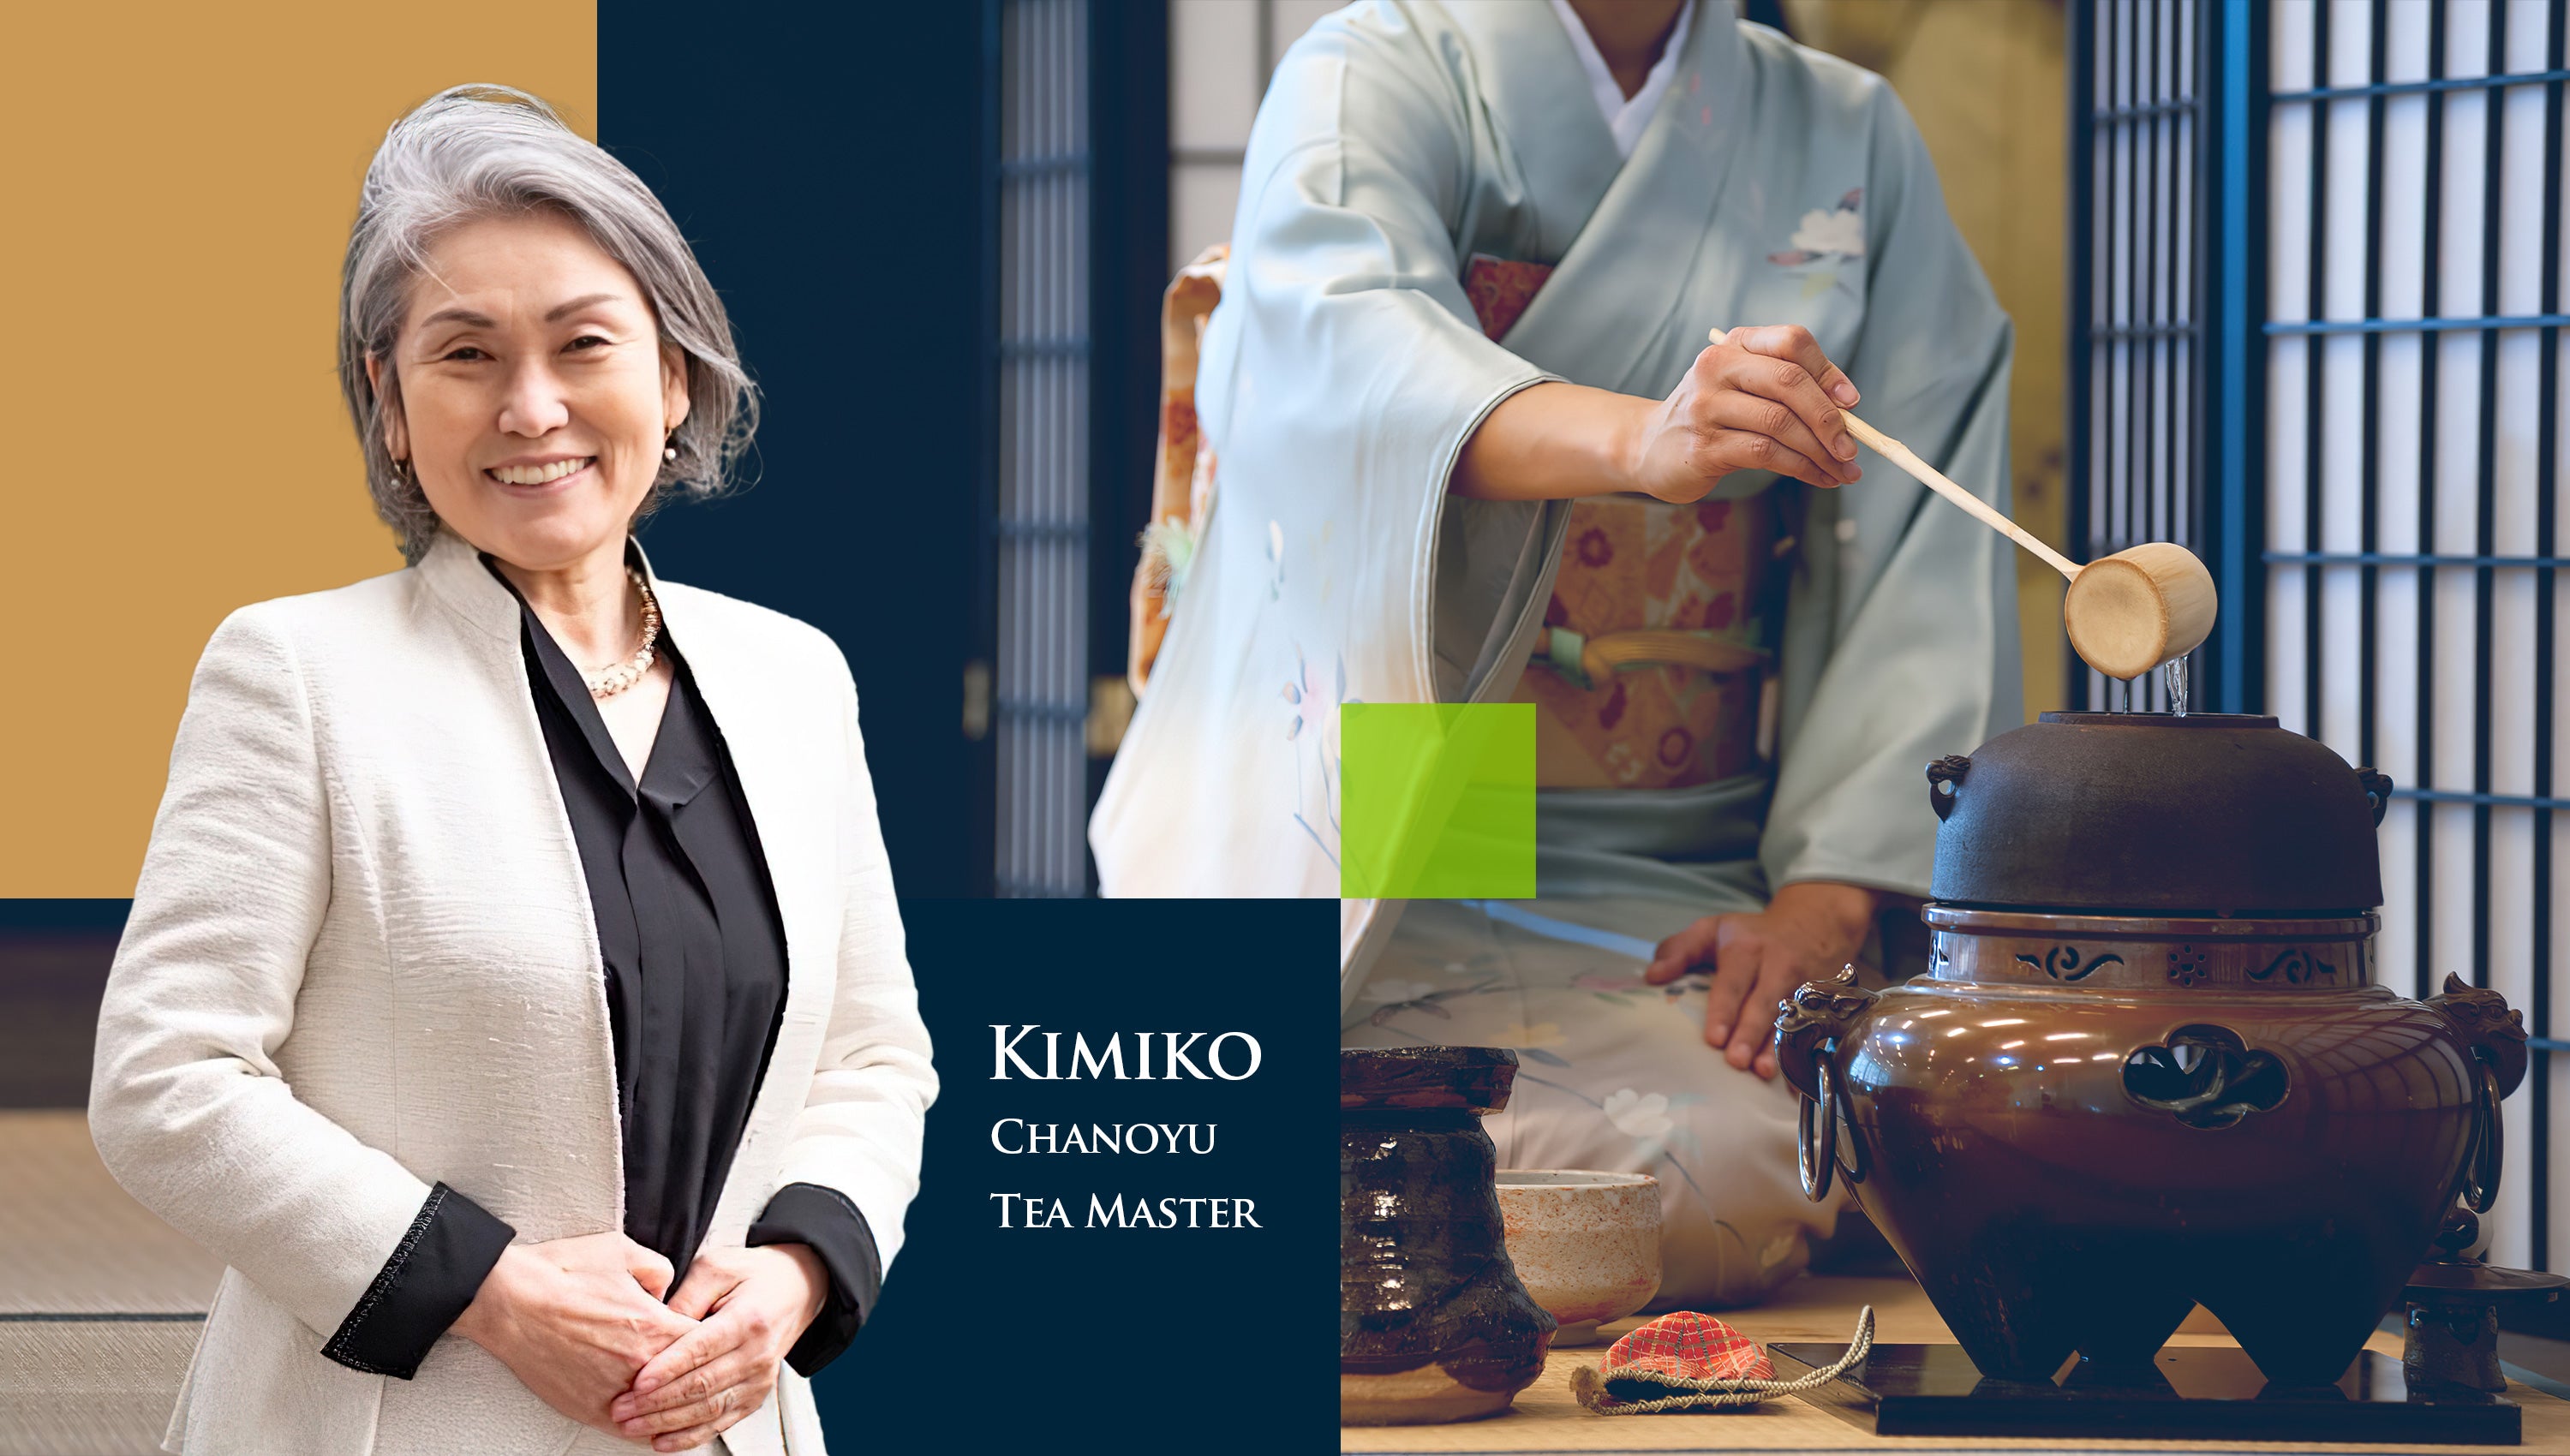 Kimiko, a Japanese tea ceremony master and our official brand ambassador